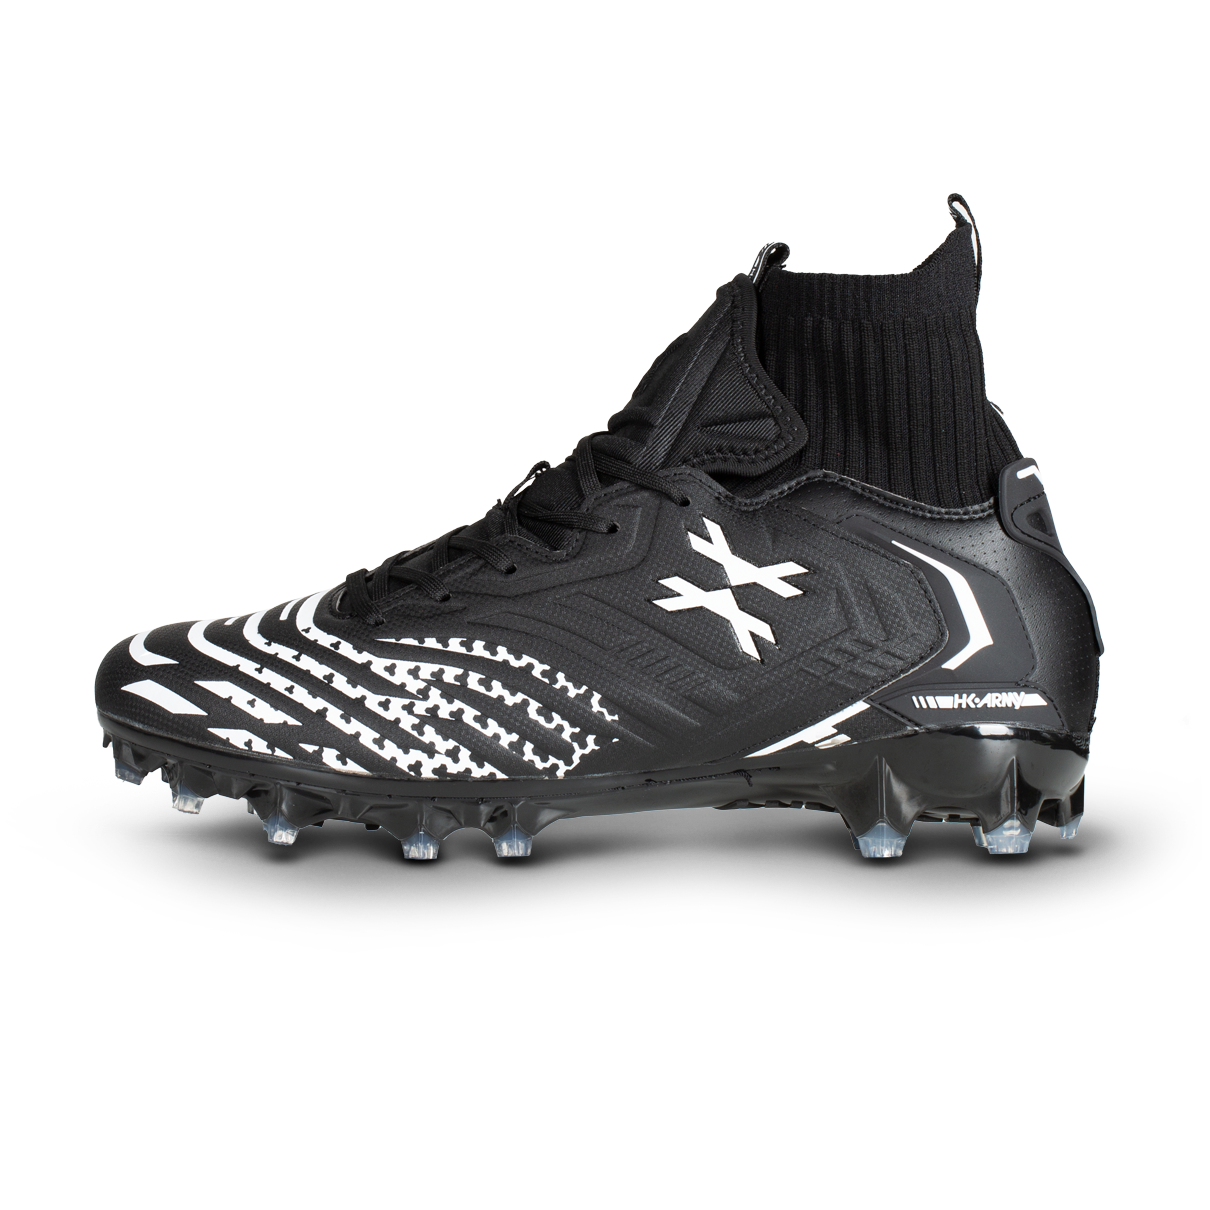 LT DIGGERZ_X1 - Low Top Cleats - Black/White - Eminent Paintball And Airsoft